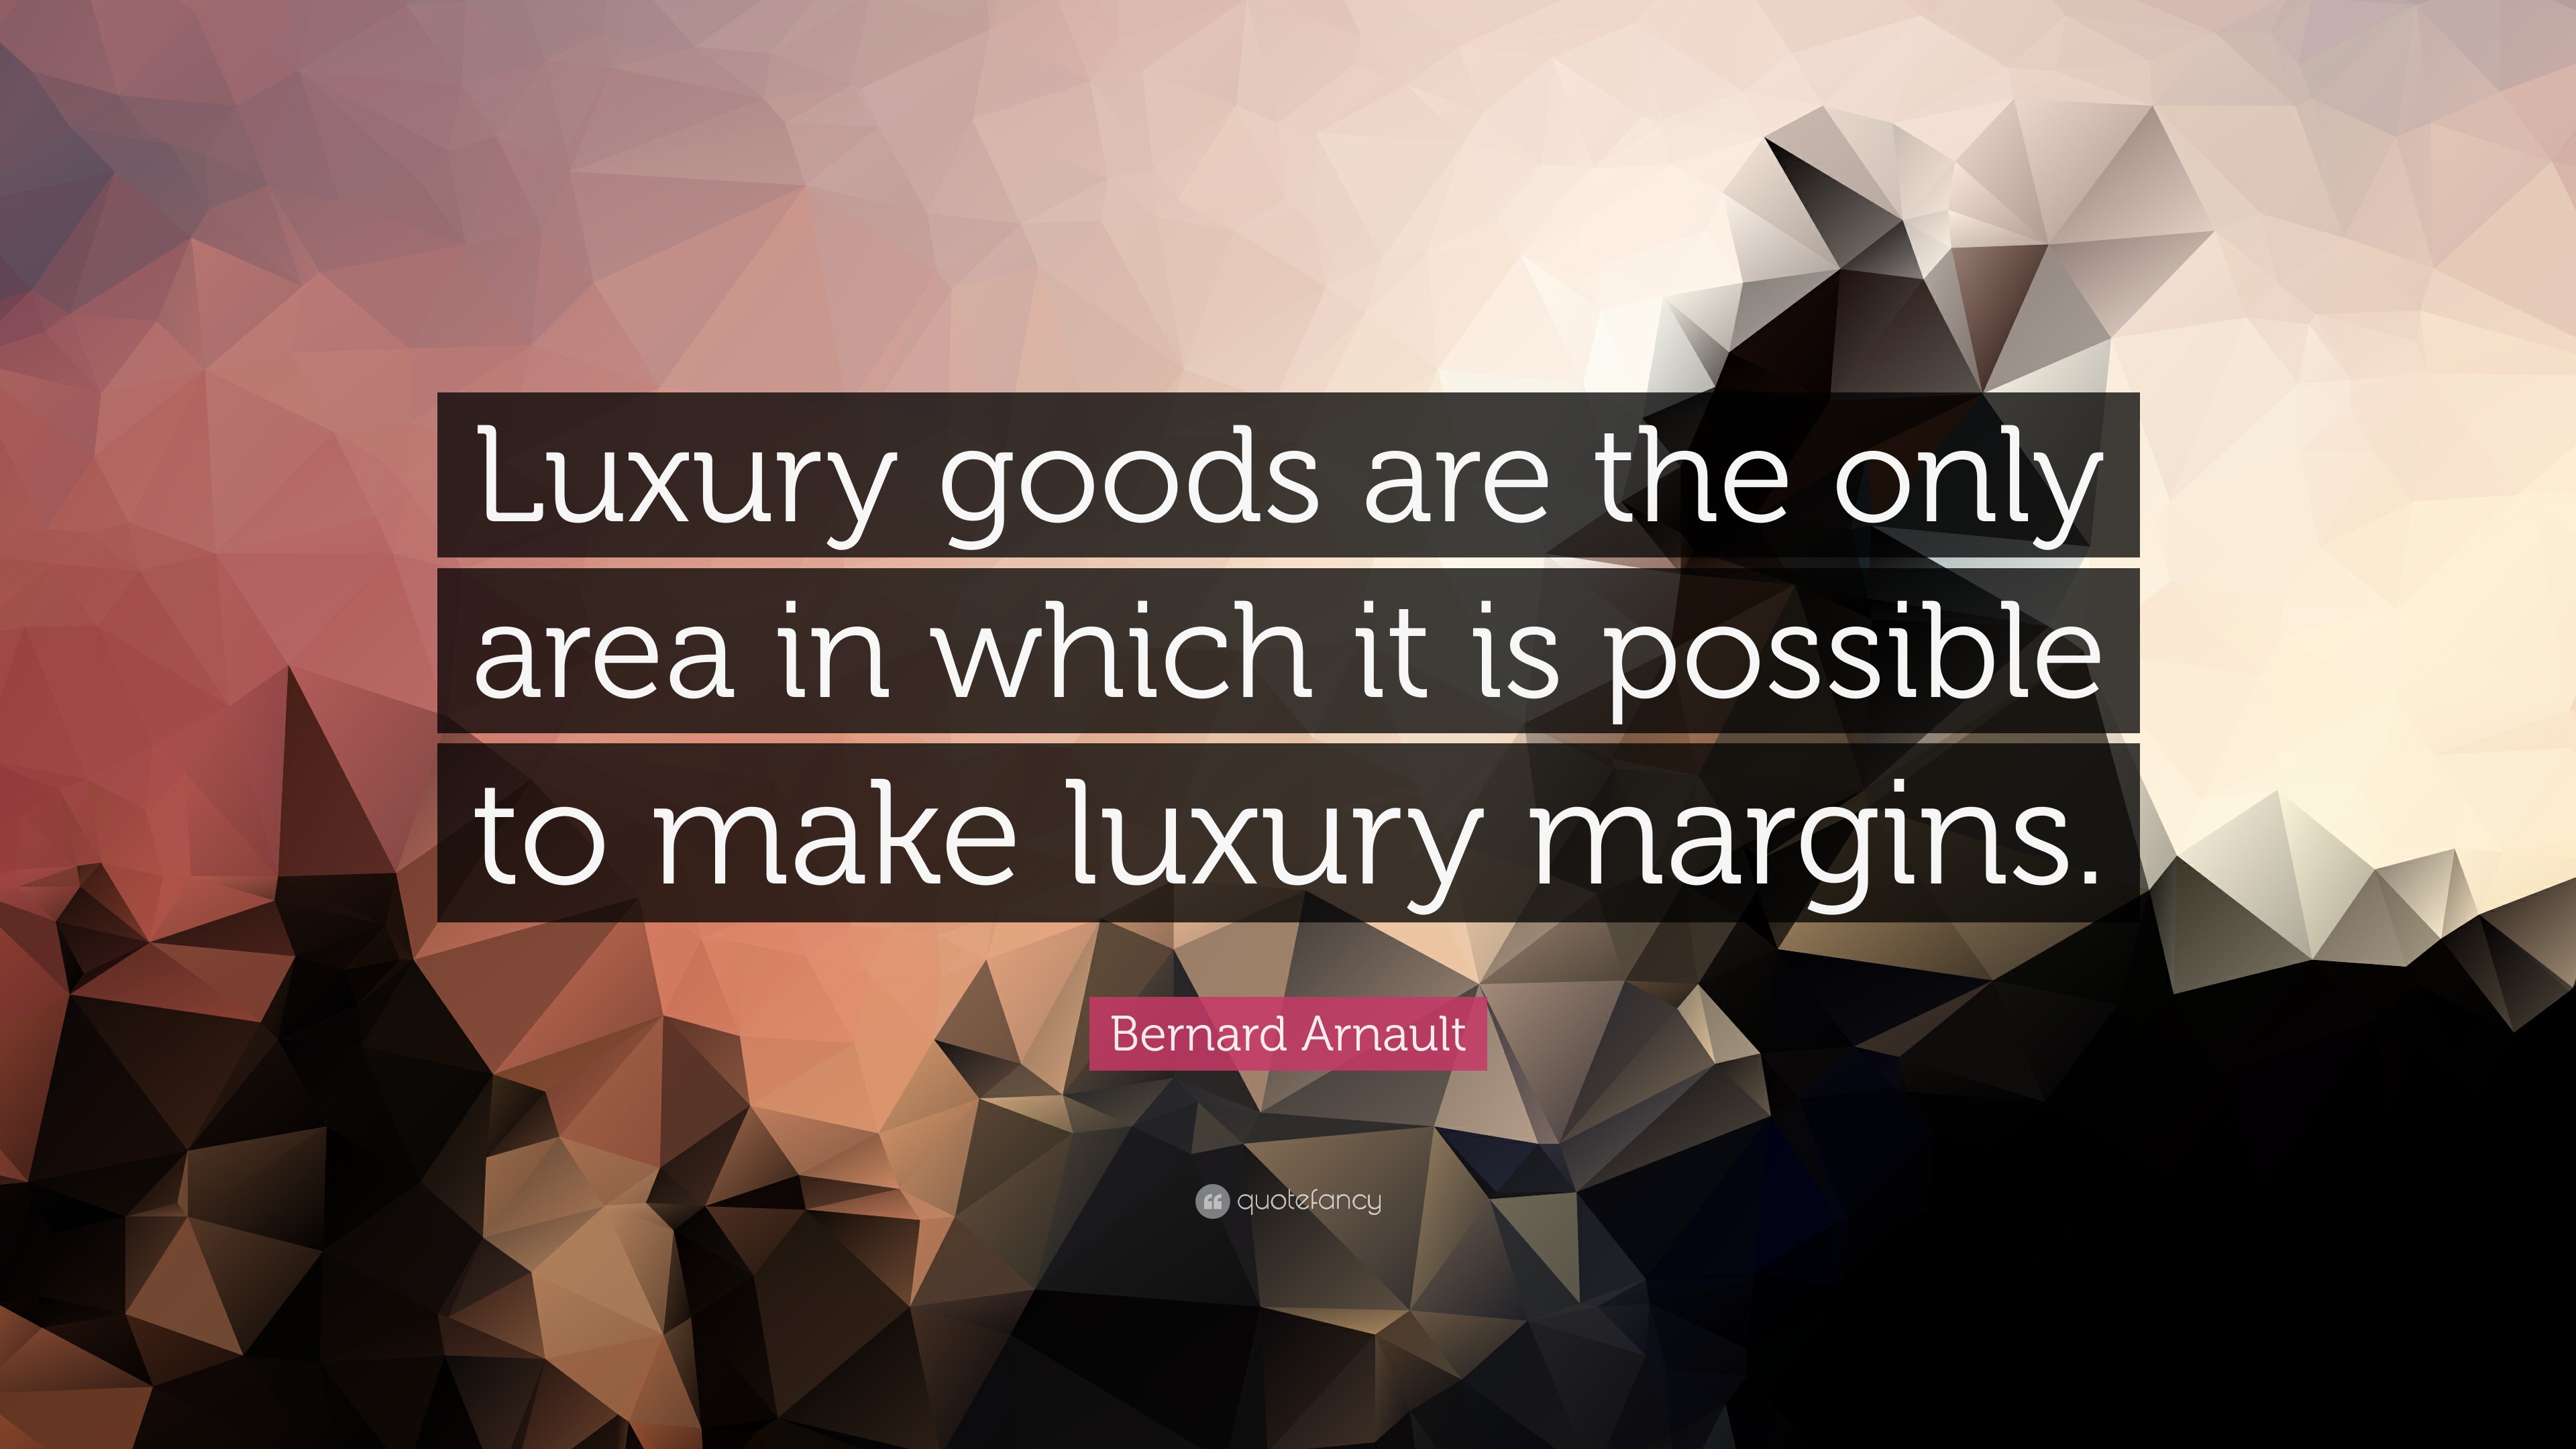 Bernard Arnault Quote: “Luxury goods are the only area in which it